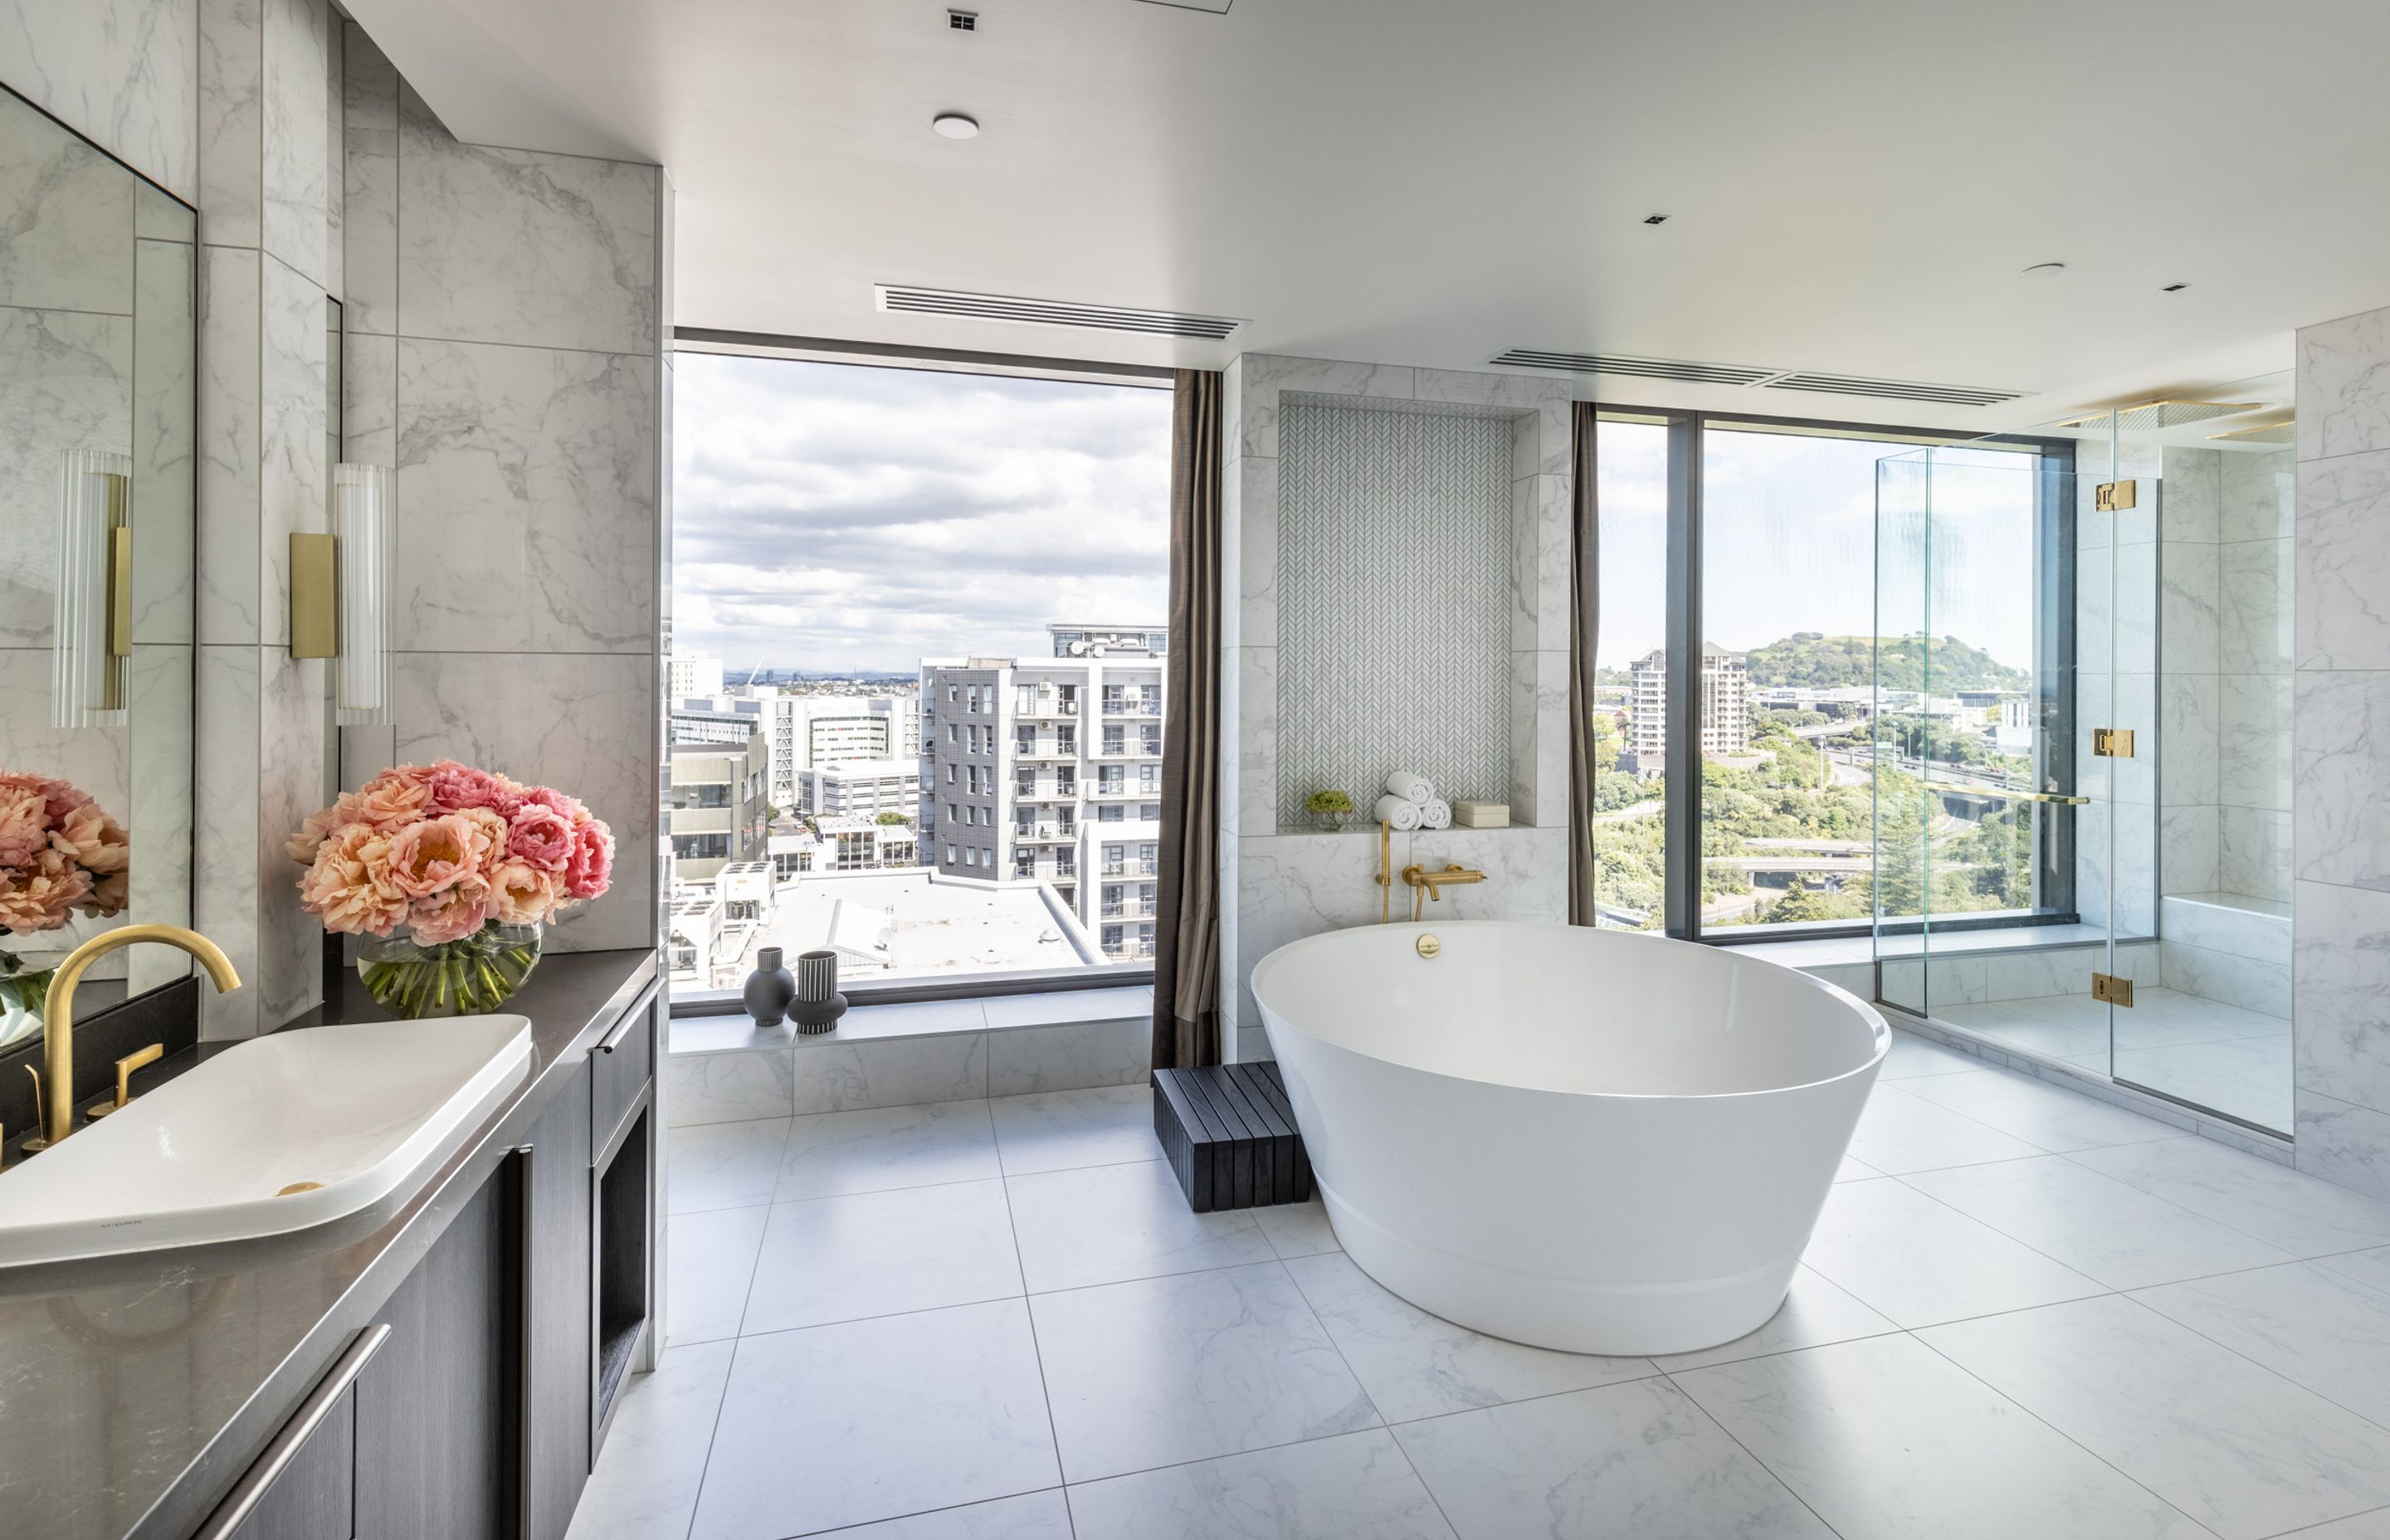 The Chairman suite features an opulent freestanding bath in an oversize bathroom.